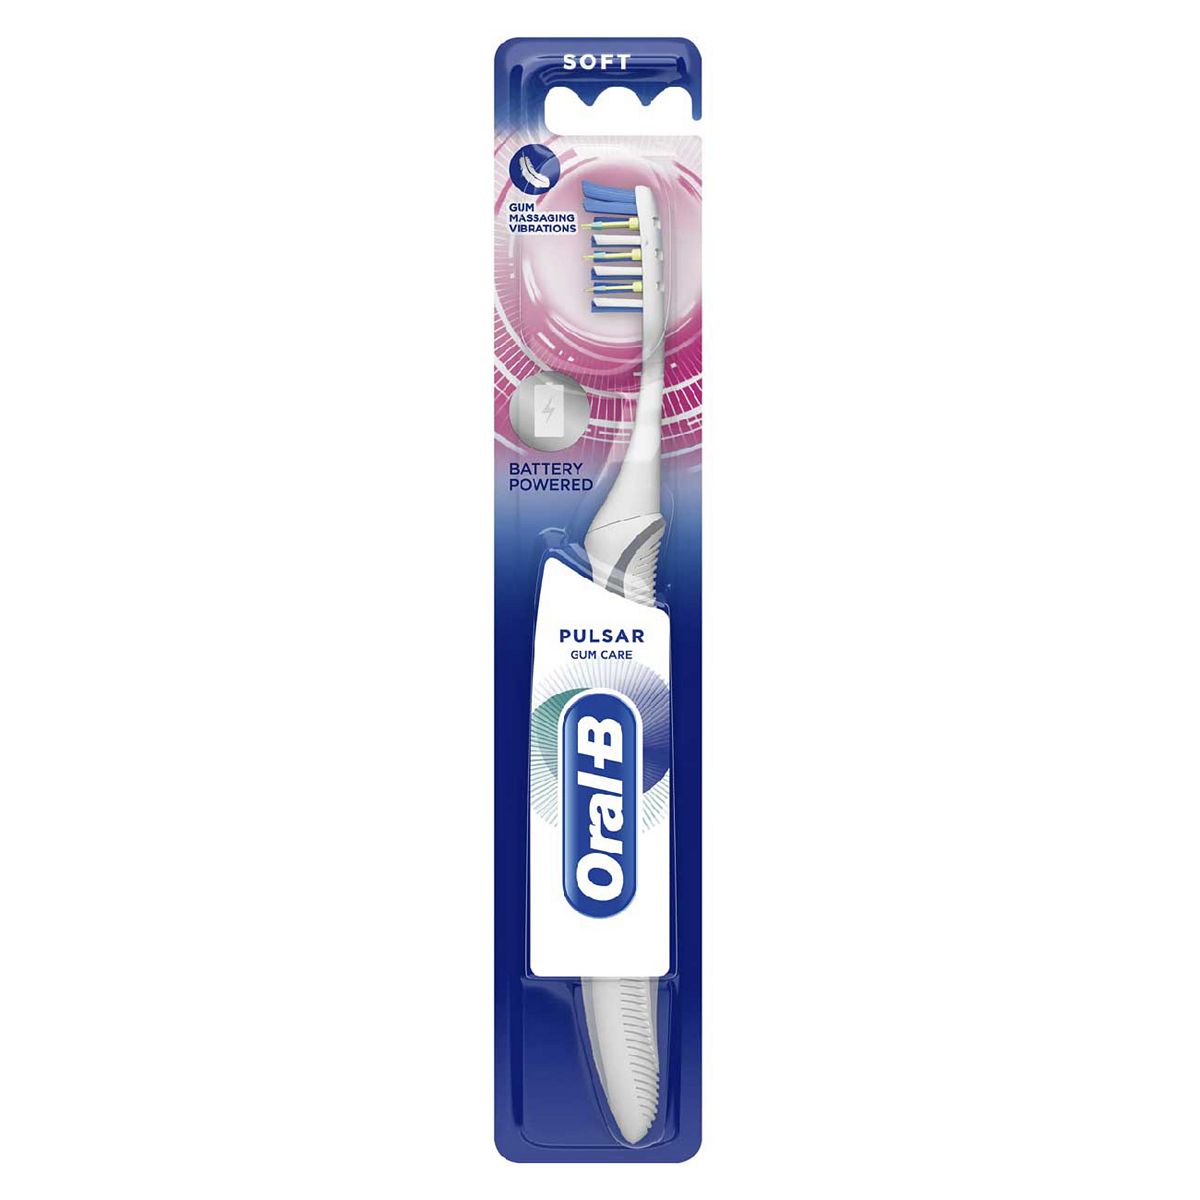 Oral-B Pulsar Gum Care Manual Toothbrush With Battery Power GOODS Boots   